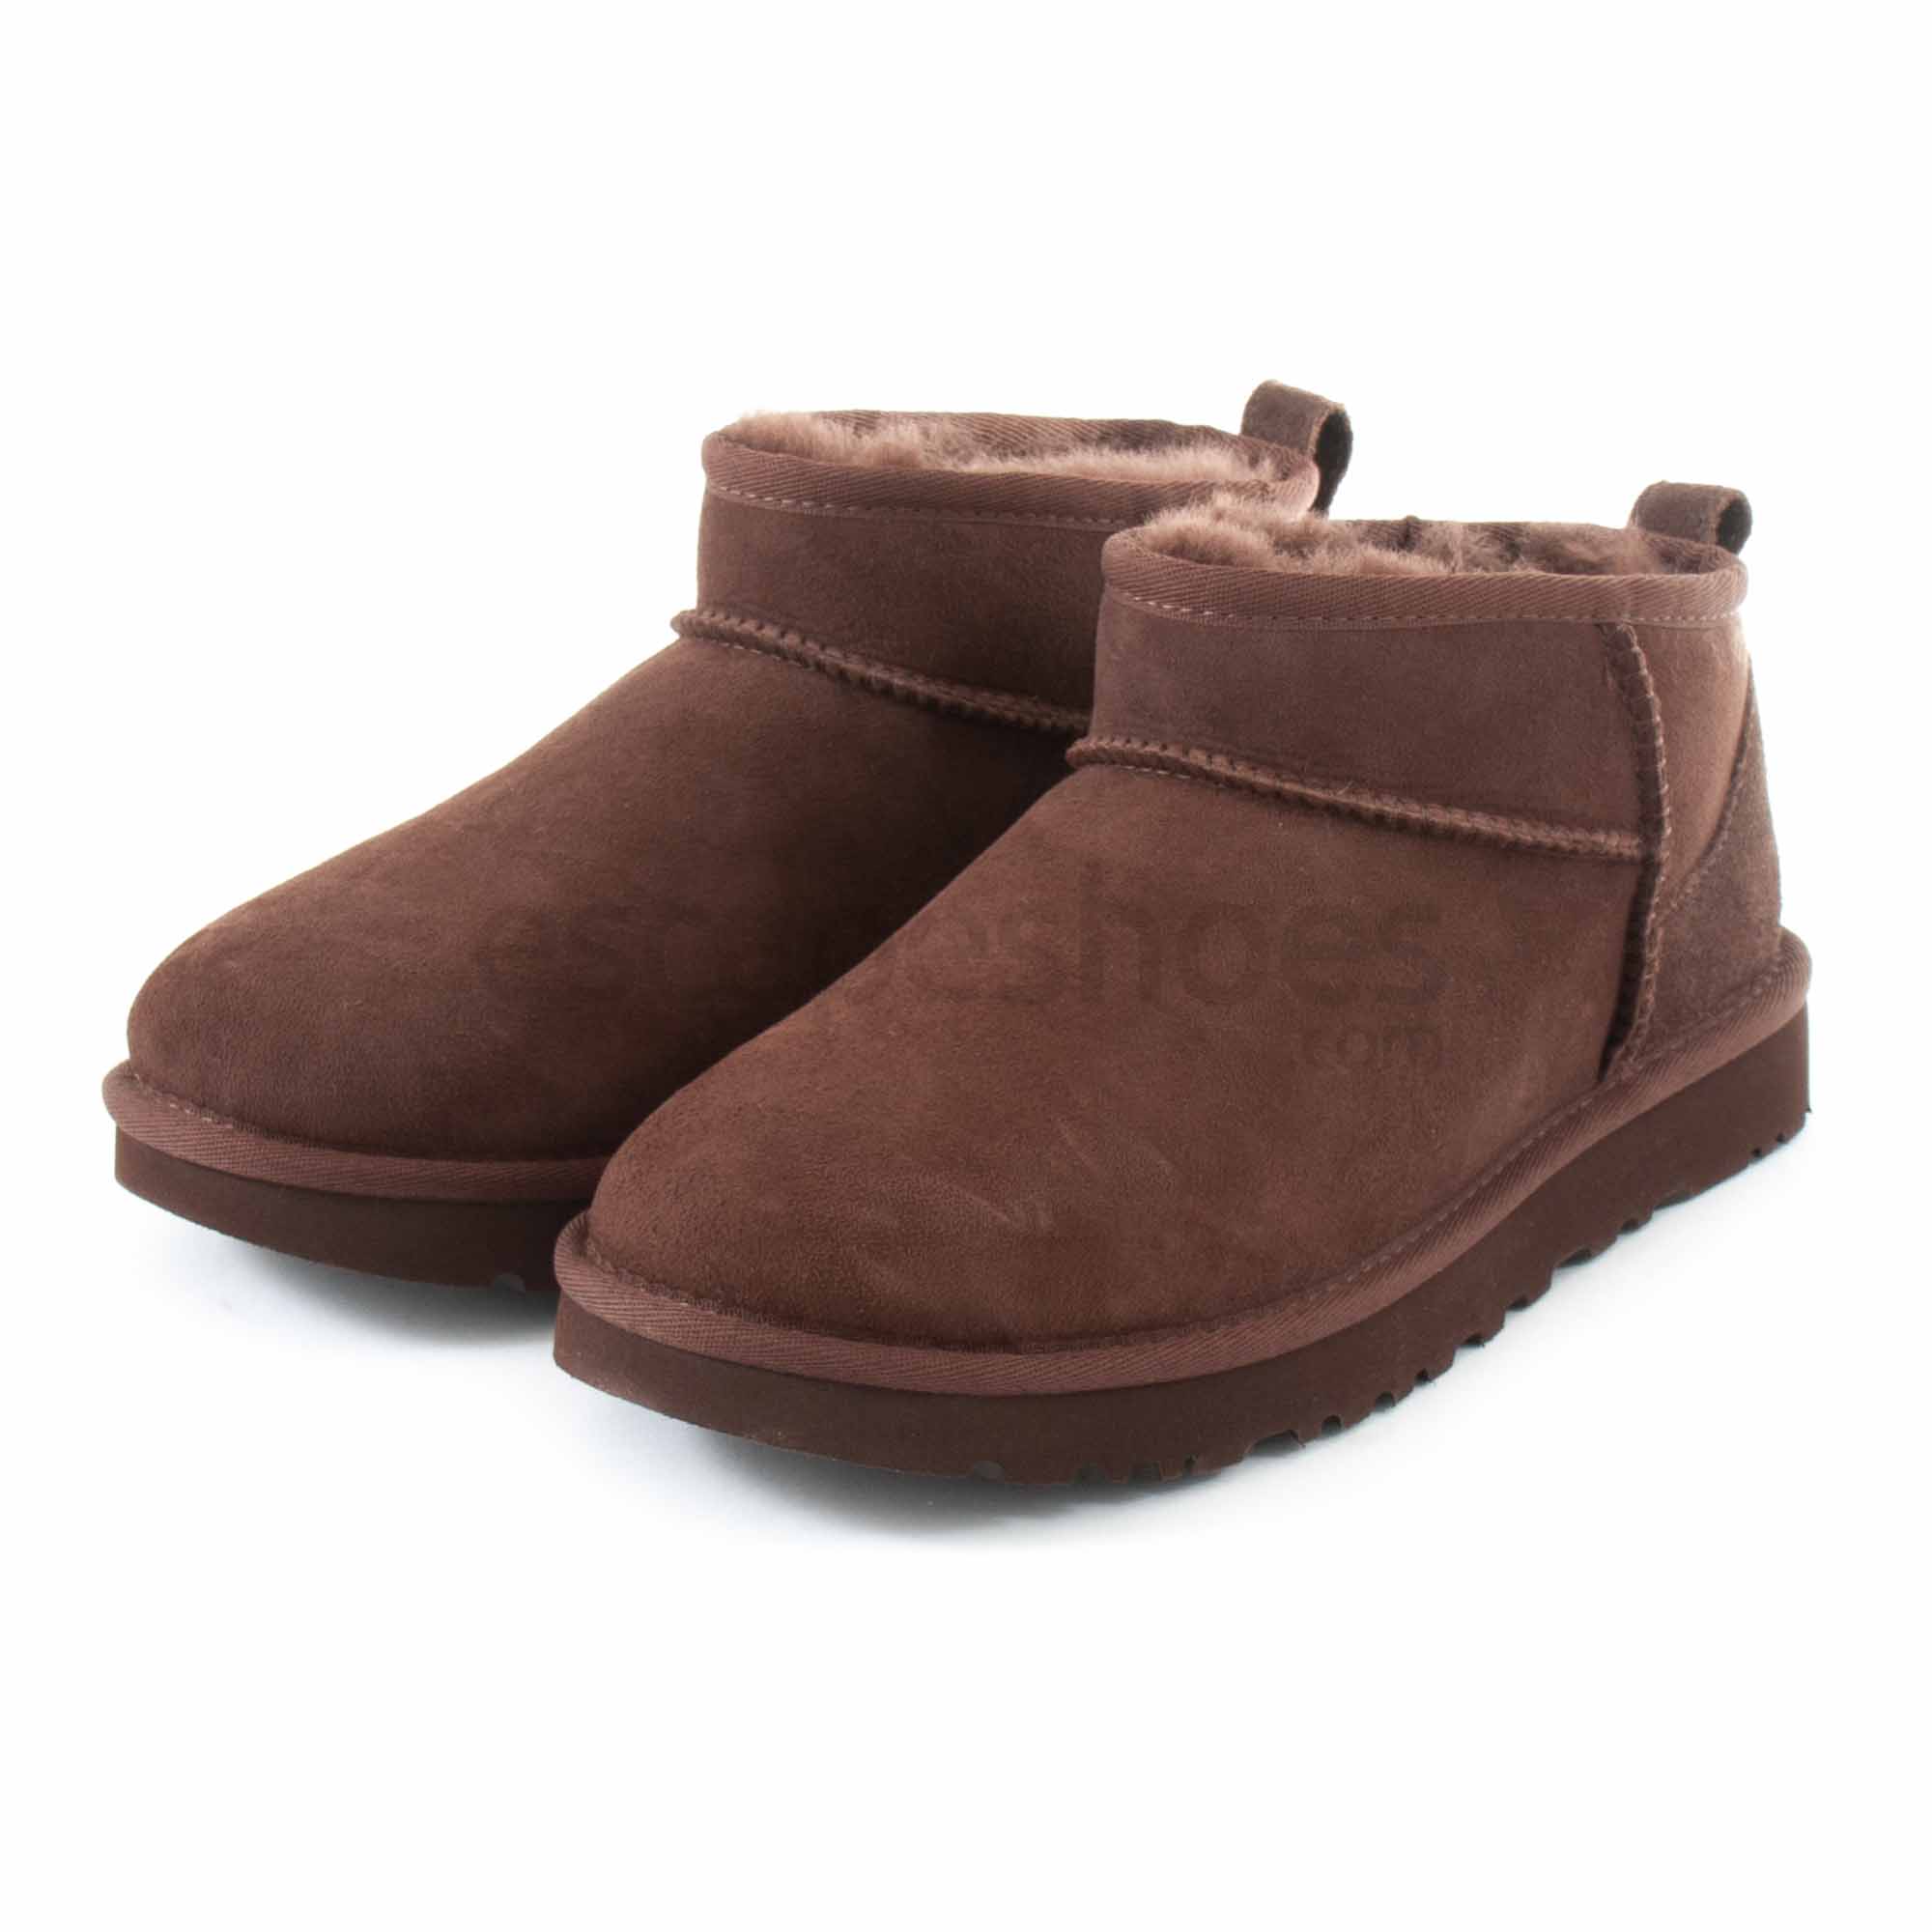 Women's Shoes UGG CLASSIC ULTRA MINI Sheepskin Ankle Boots 1116109  CHESTNUT